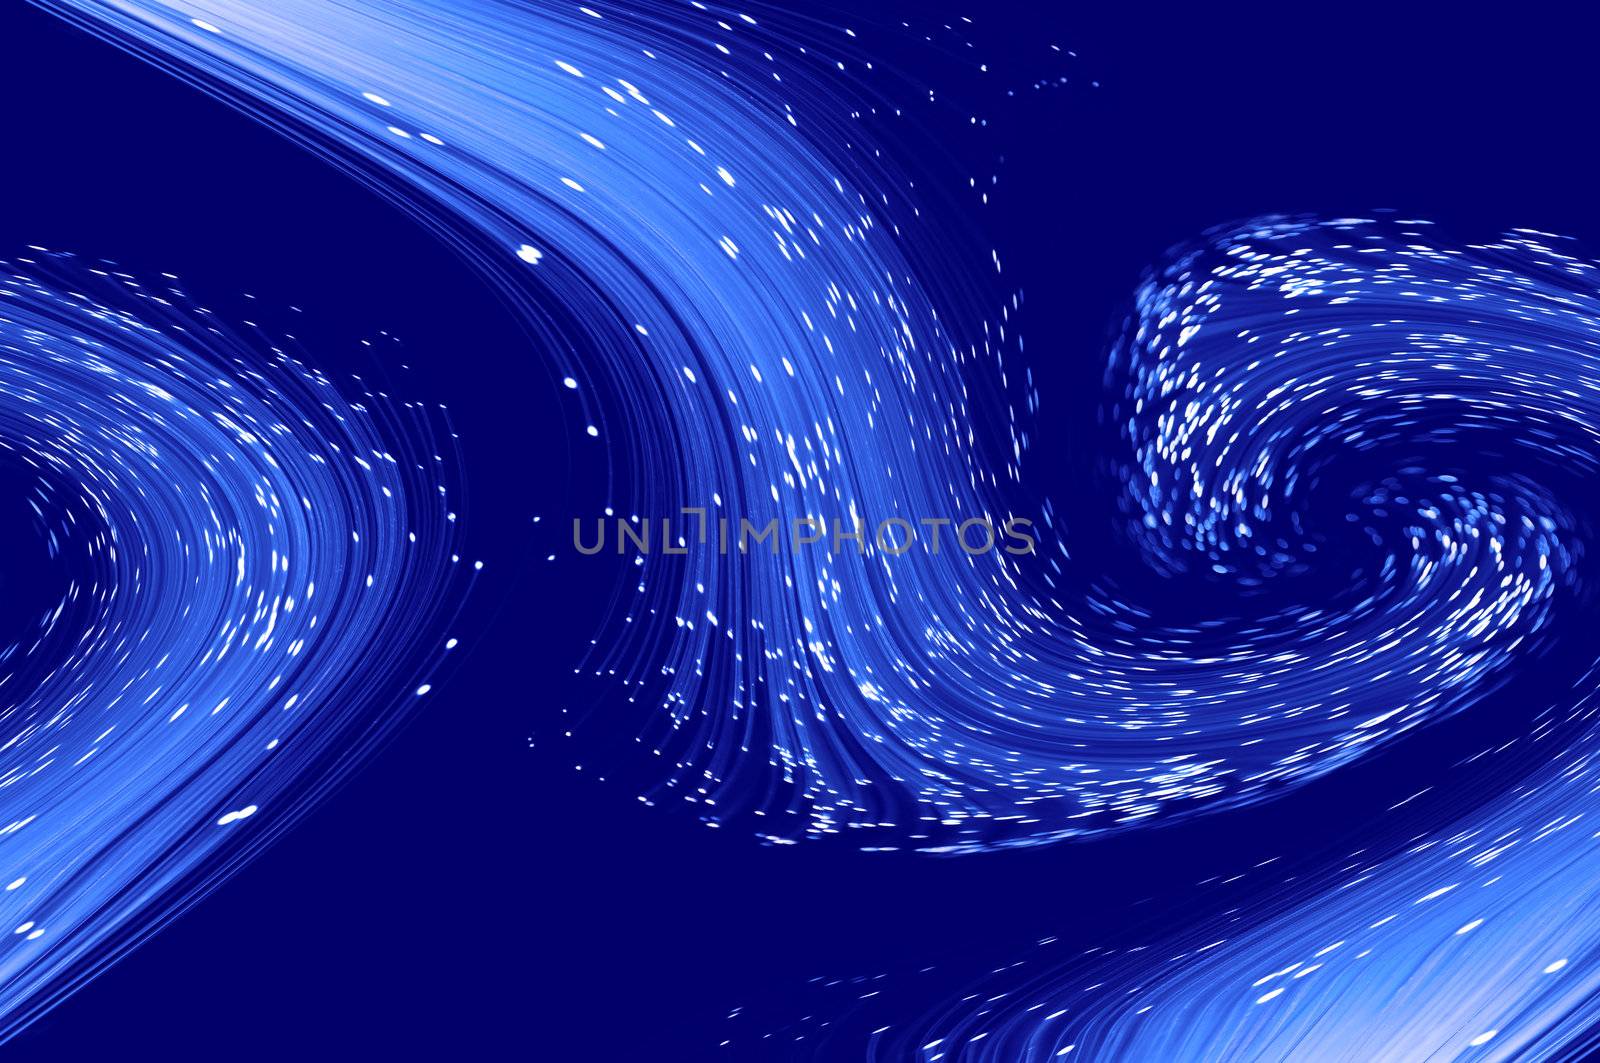 Abstract style blue fibre optic strands swirling against a blue background.